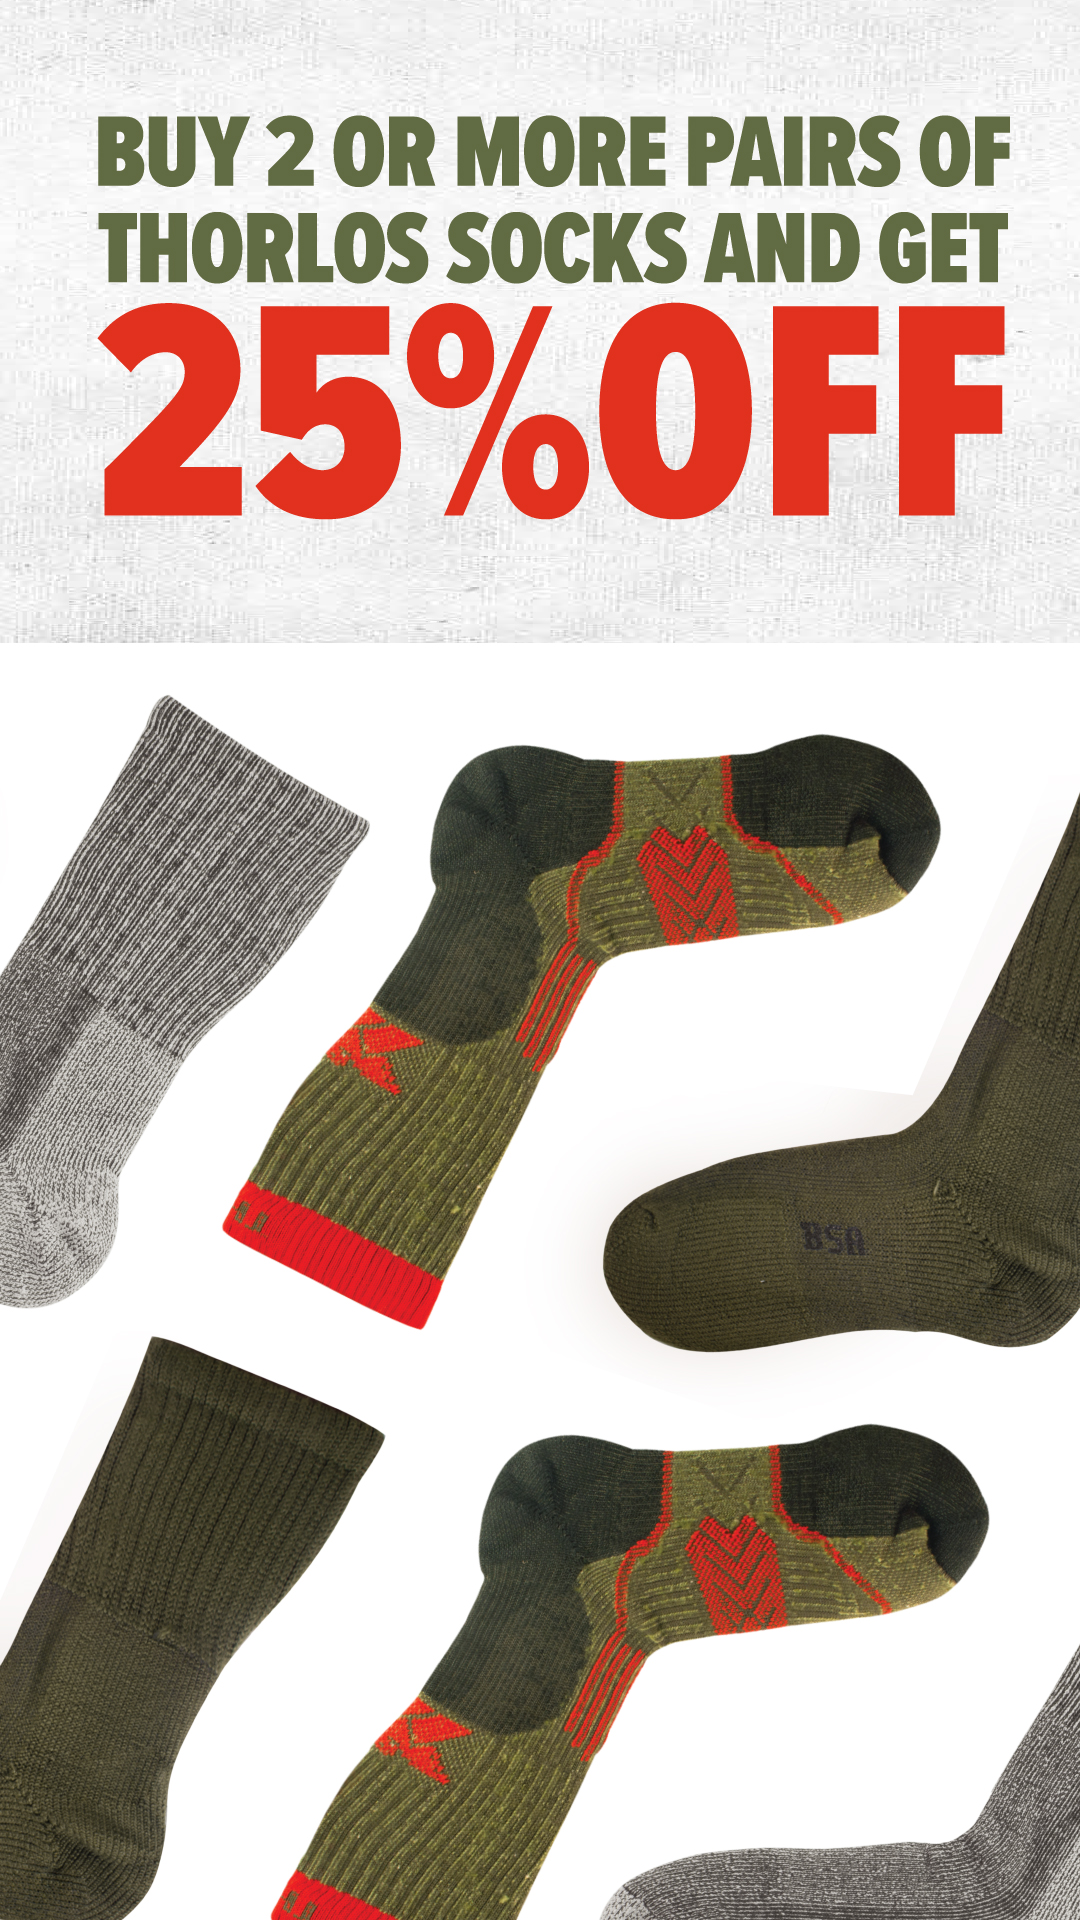 Buy 2 or more pairs of Thorlos socks and get 25% off